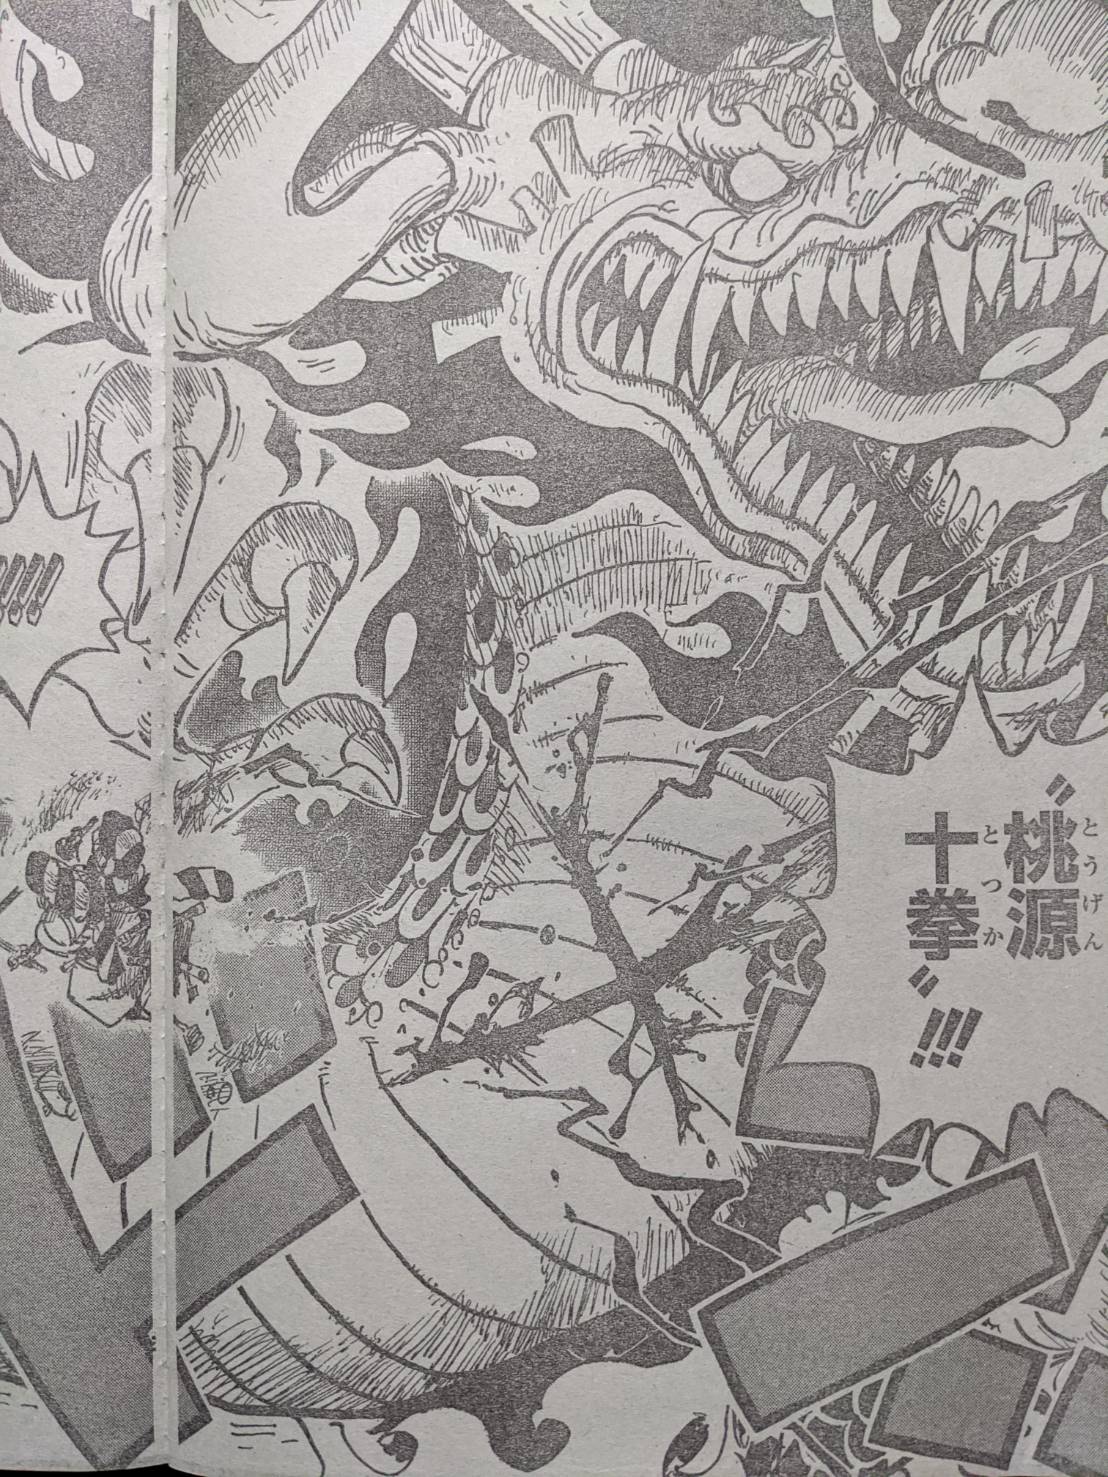 Onepiece970話考察 カイドウの傷はおでん様の桃源十拳 普通に戦えば強い ワンピース考察 甲塚誓ノ介のいい芝居してますね